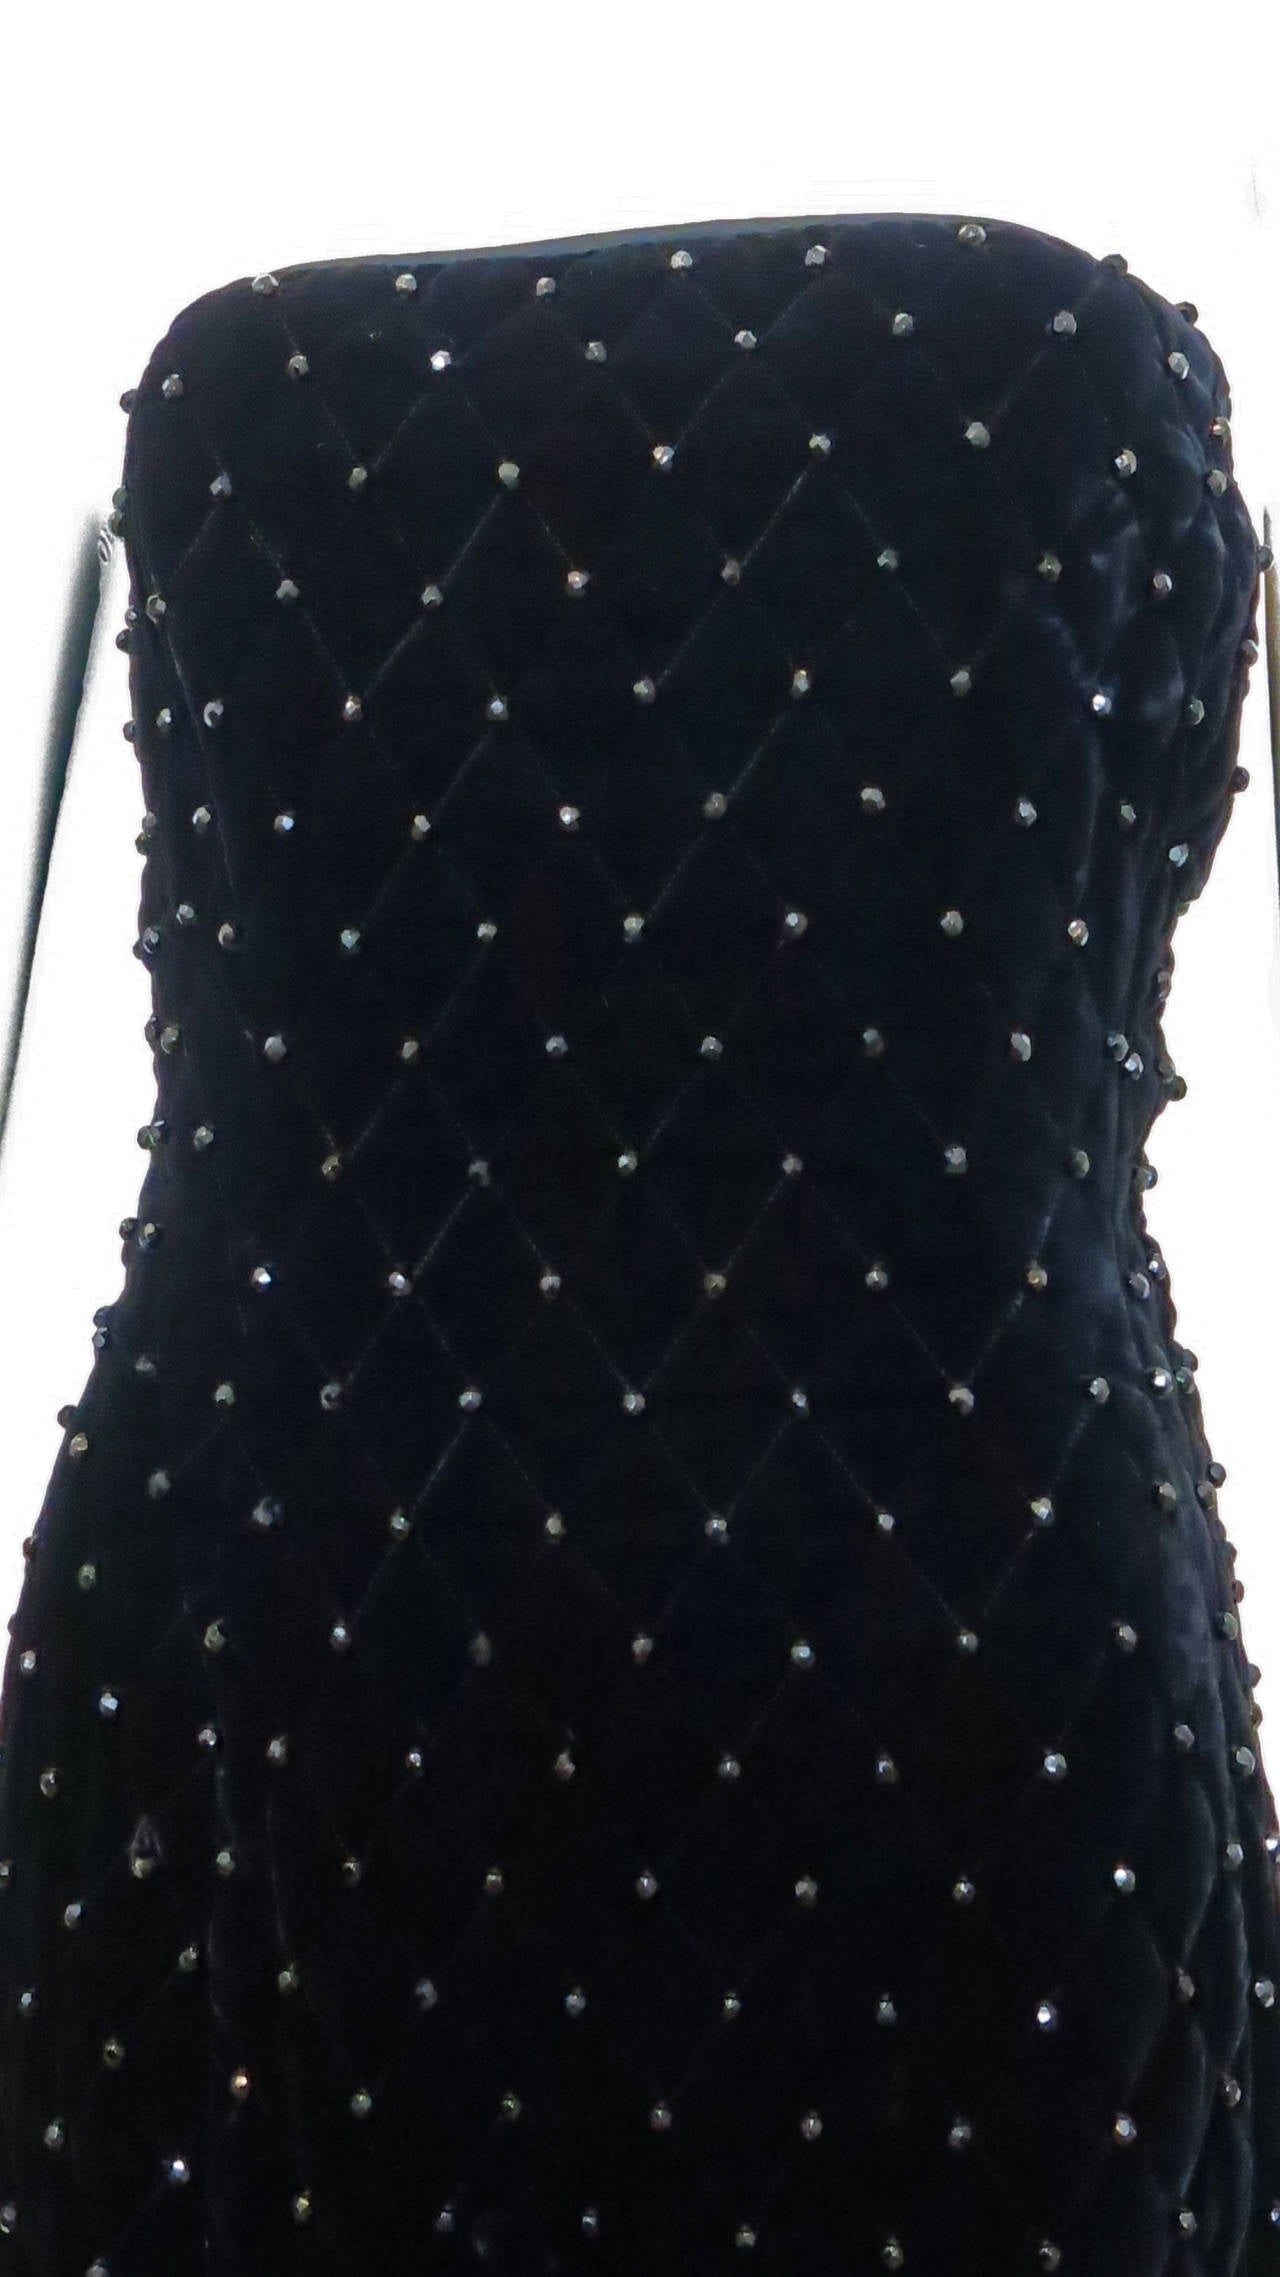 This soft and stunning quilted black velvet mini dress hugs the body and is covered with multifaceted black beads. 

Size: US 8

*Please contact dealer prior to purchase for white glove shipping options*